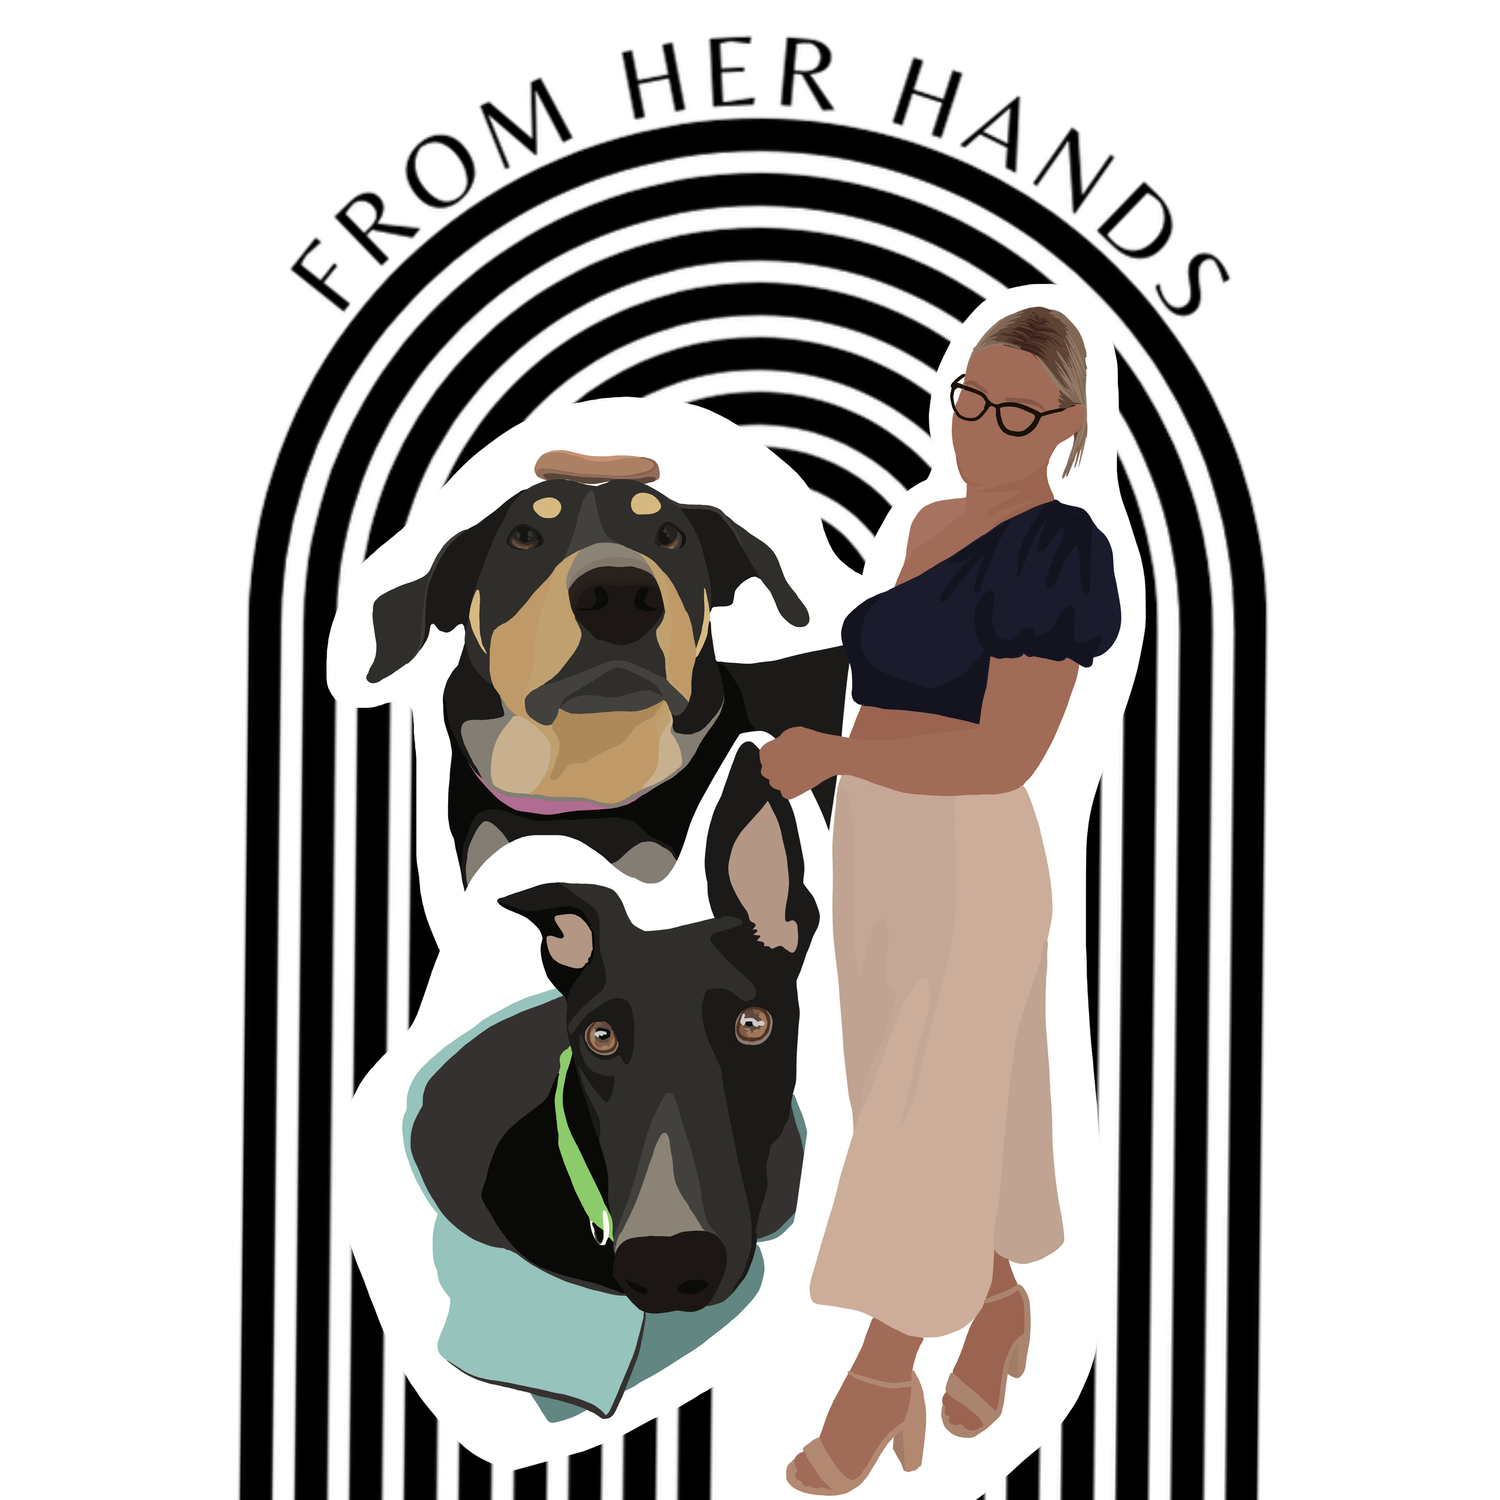 FromHerHands